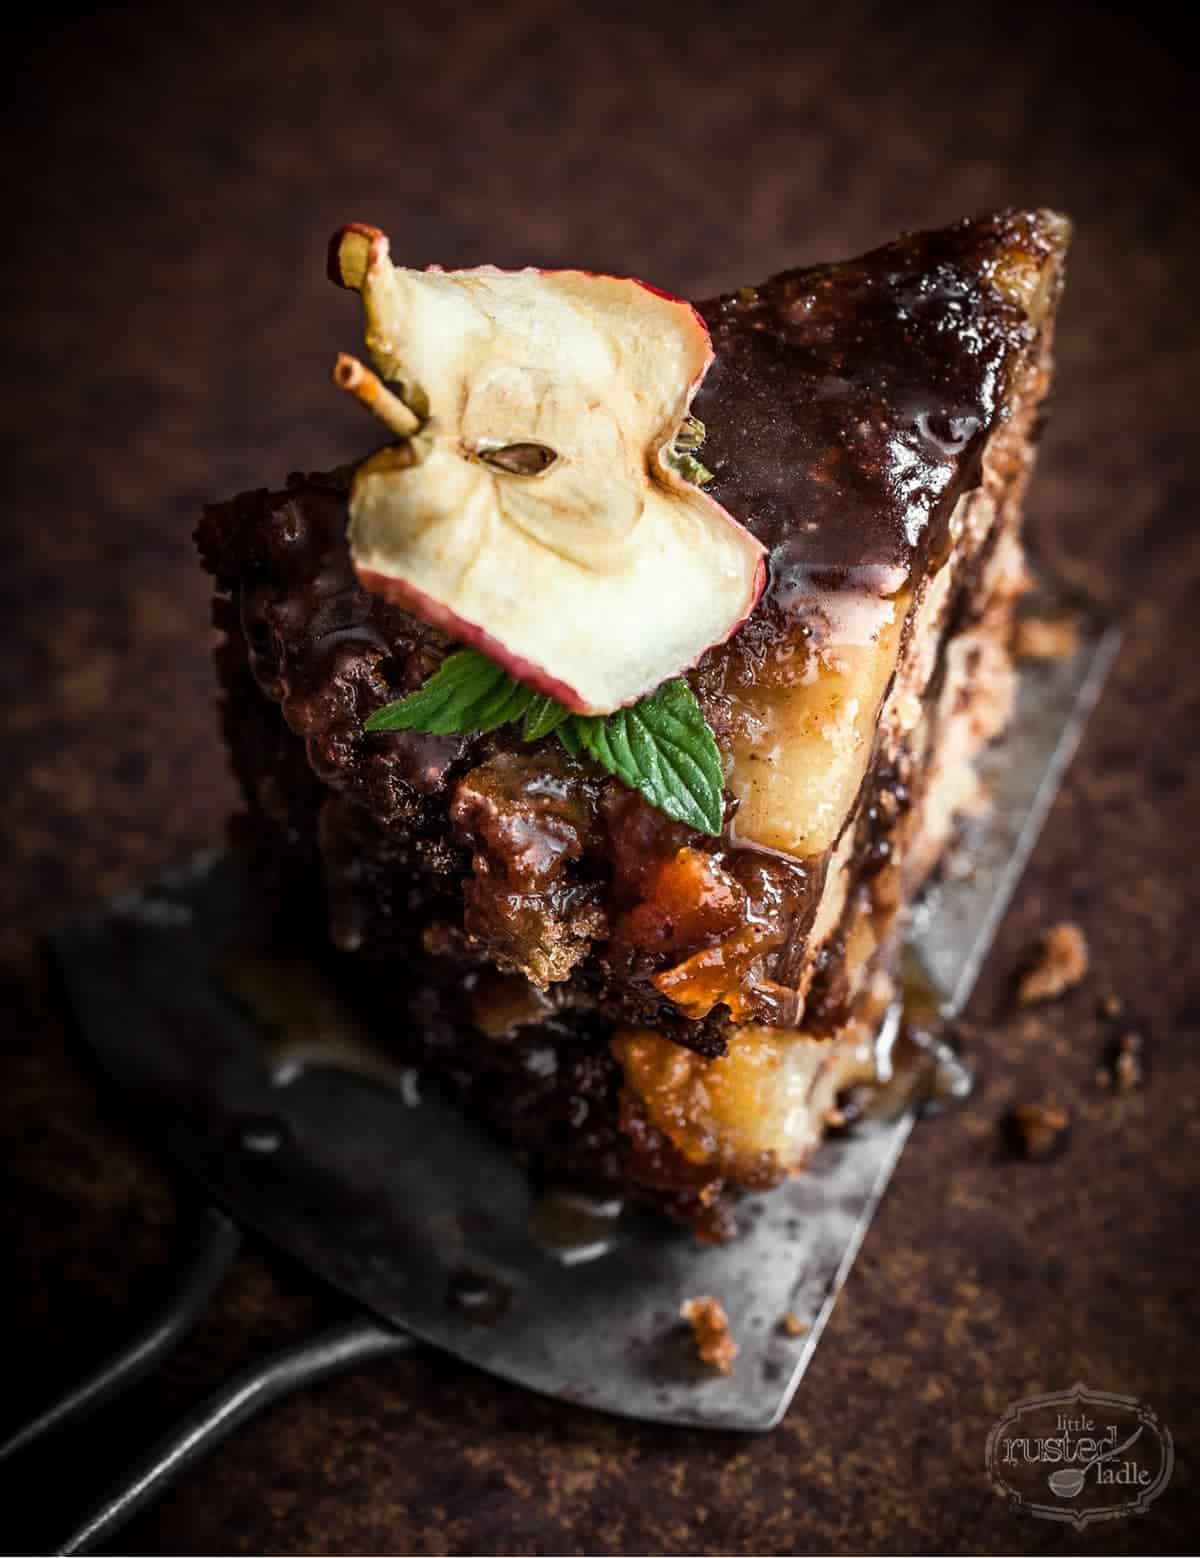 Apple Cider Cake Recipes_Little Rusted Ladle_Jena Carlin Photography_Rude on Food_9 96WM